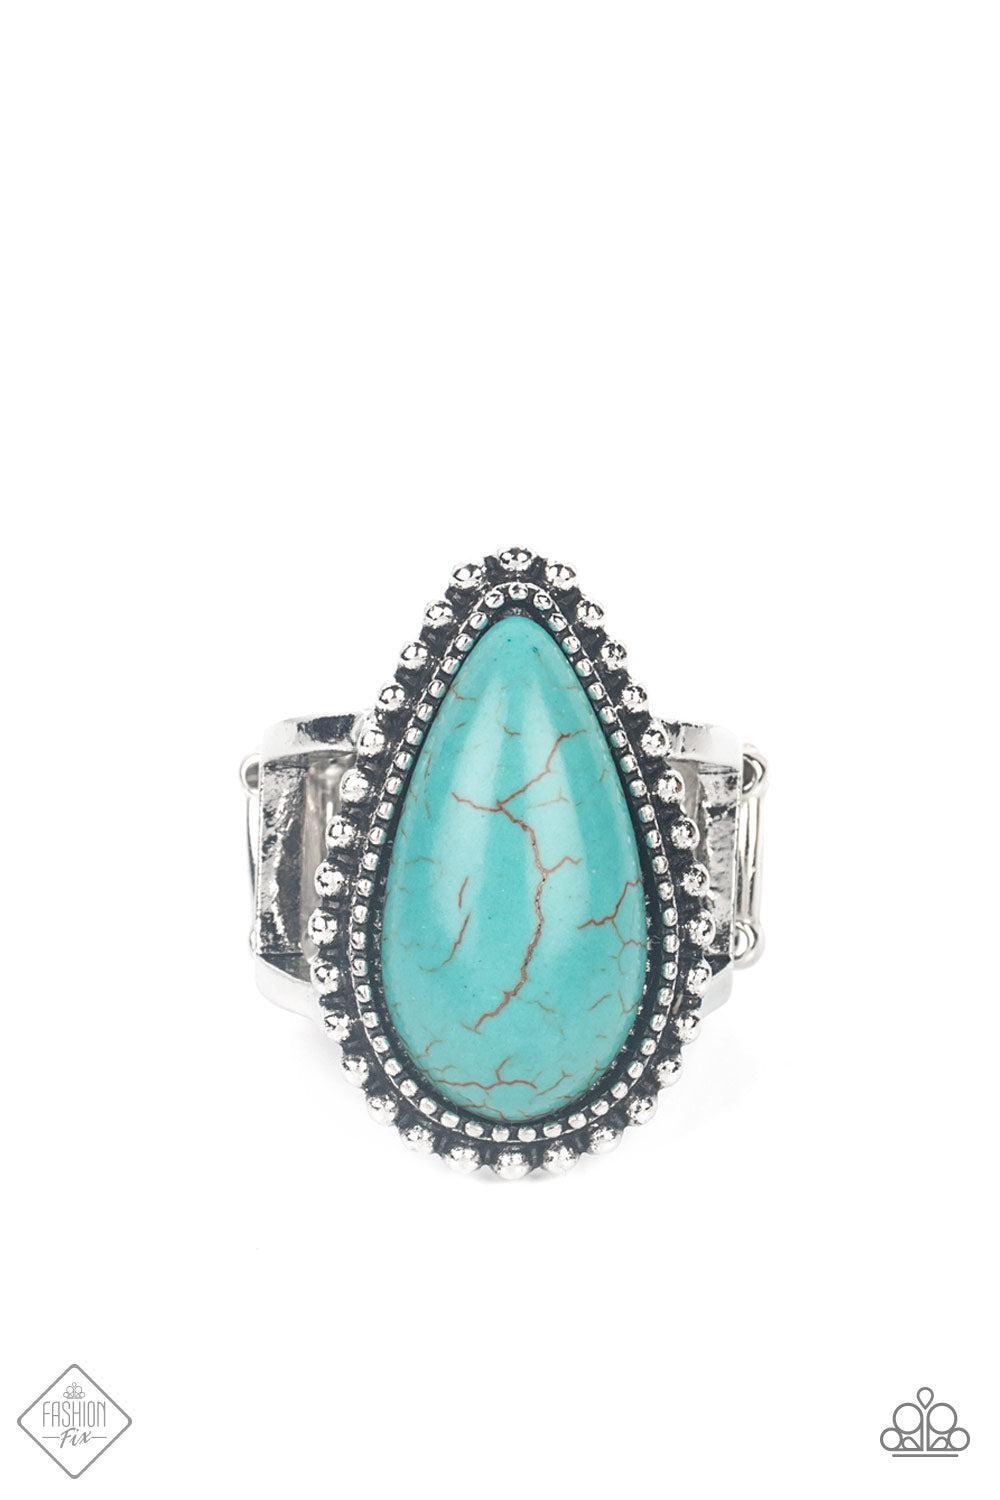 Urban Elements - Blue (Turquoise) Ring (SSF-0422)